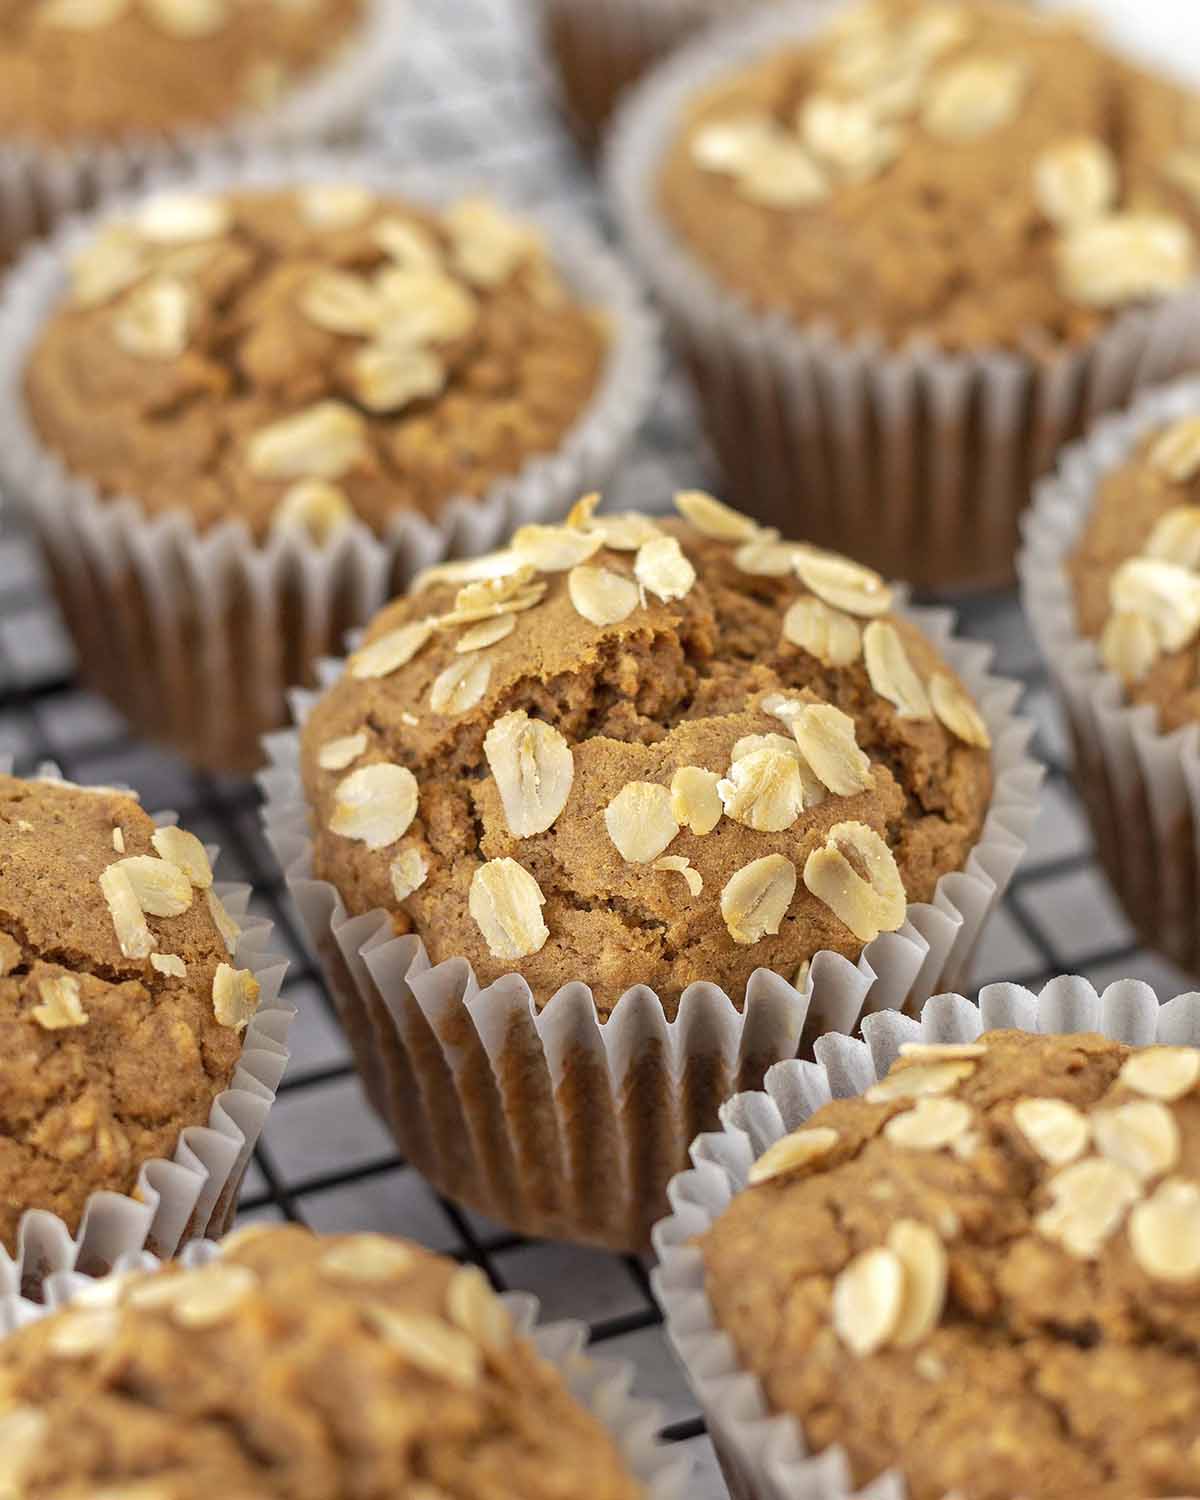 Image shows freshly baked oatmeal muffins on a cooling rack.